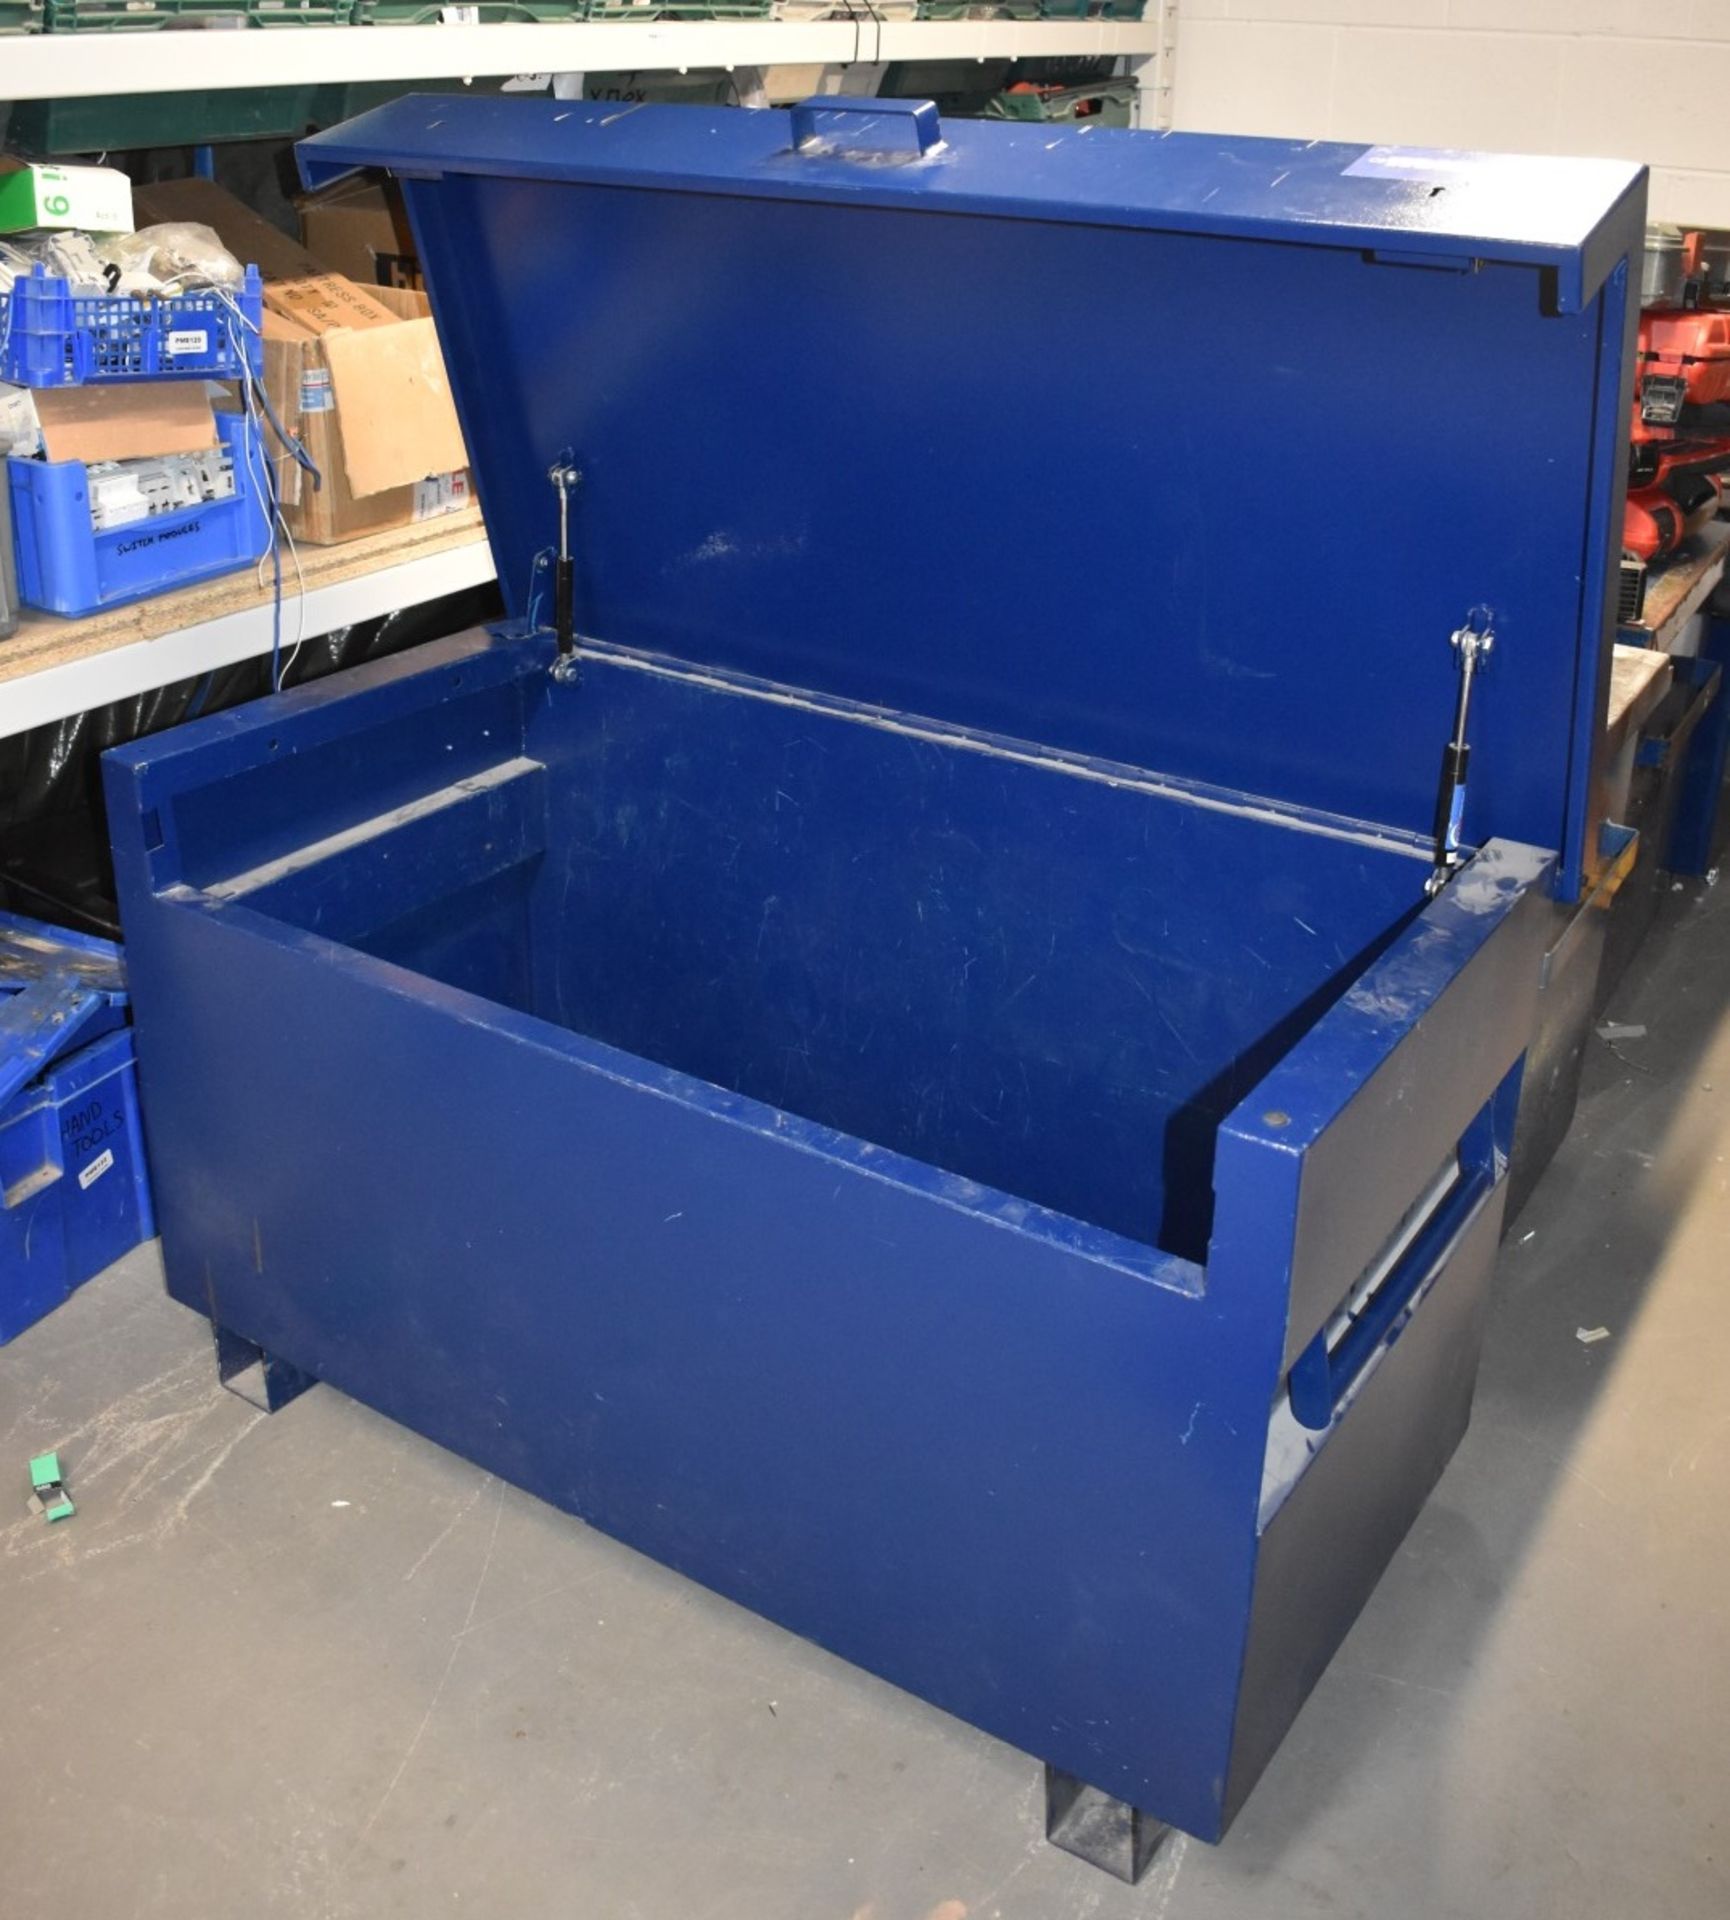 1 x Site Safe Tool Storage Chest - Ideal For Use on Worksites and Vans To Help Protect Your - Image 3 of 4